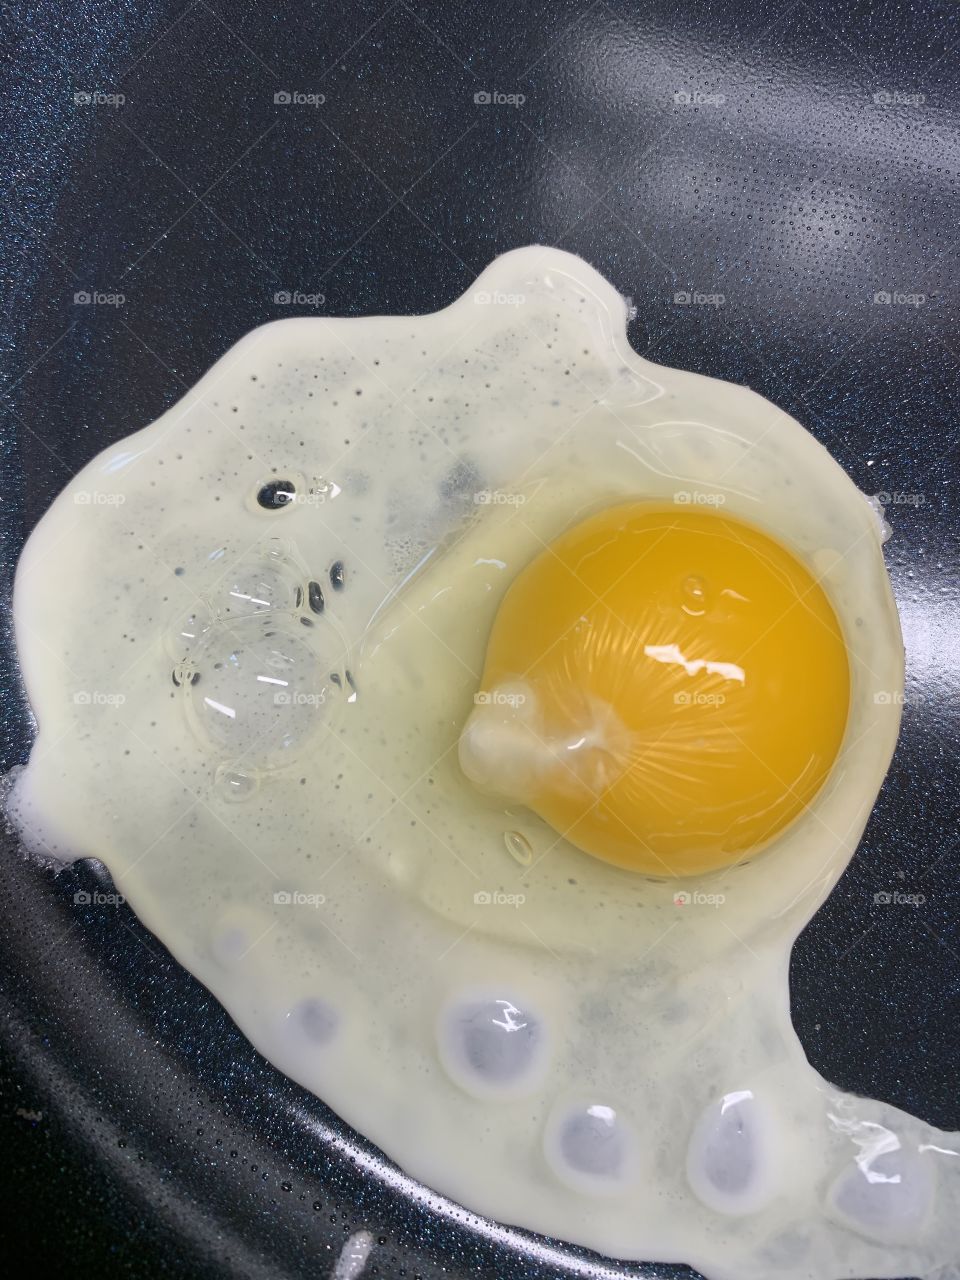 The art in an egg